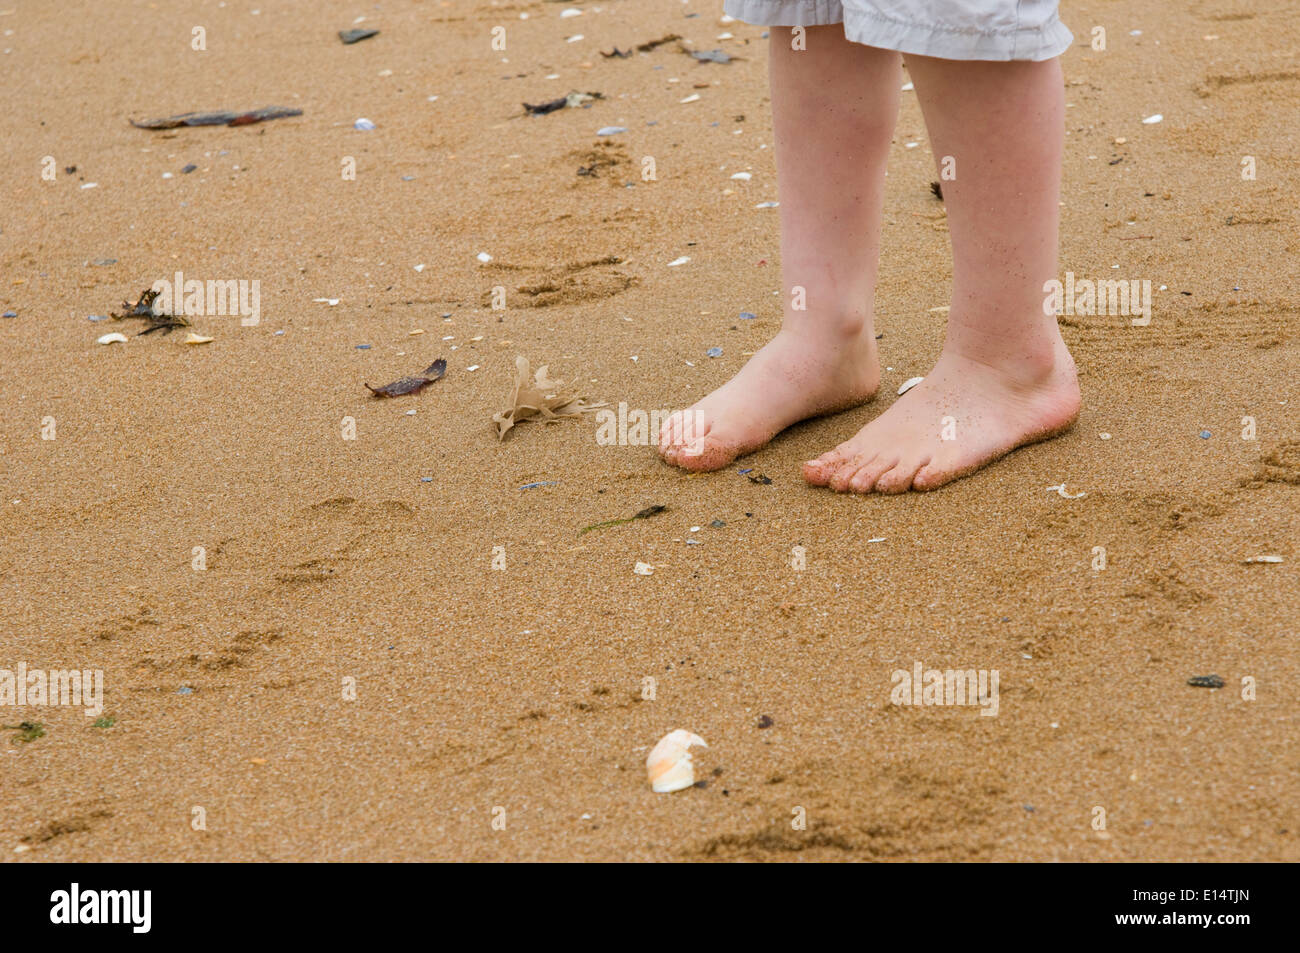 young feet standing on the beach Stock Photo